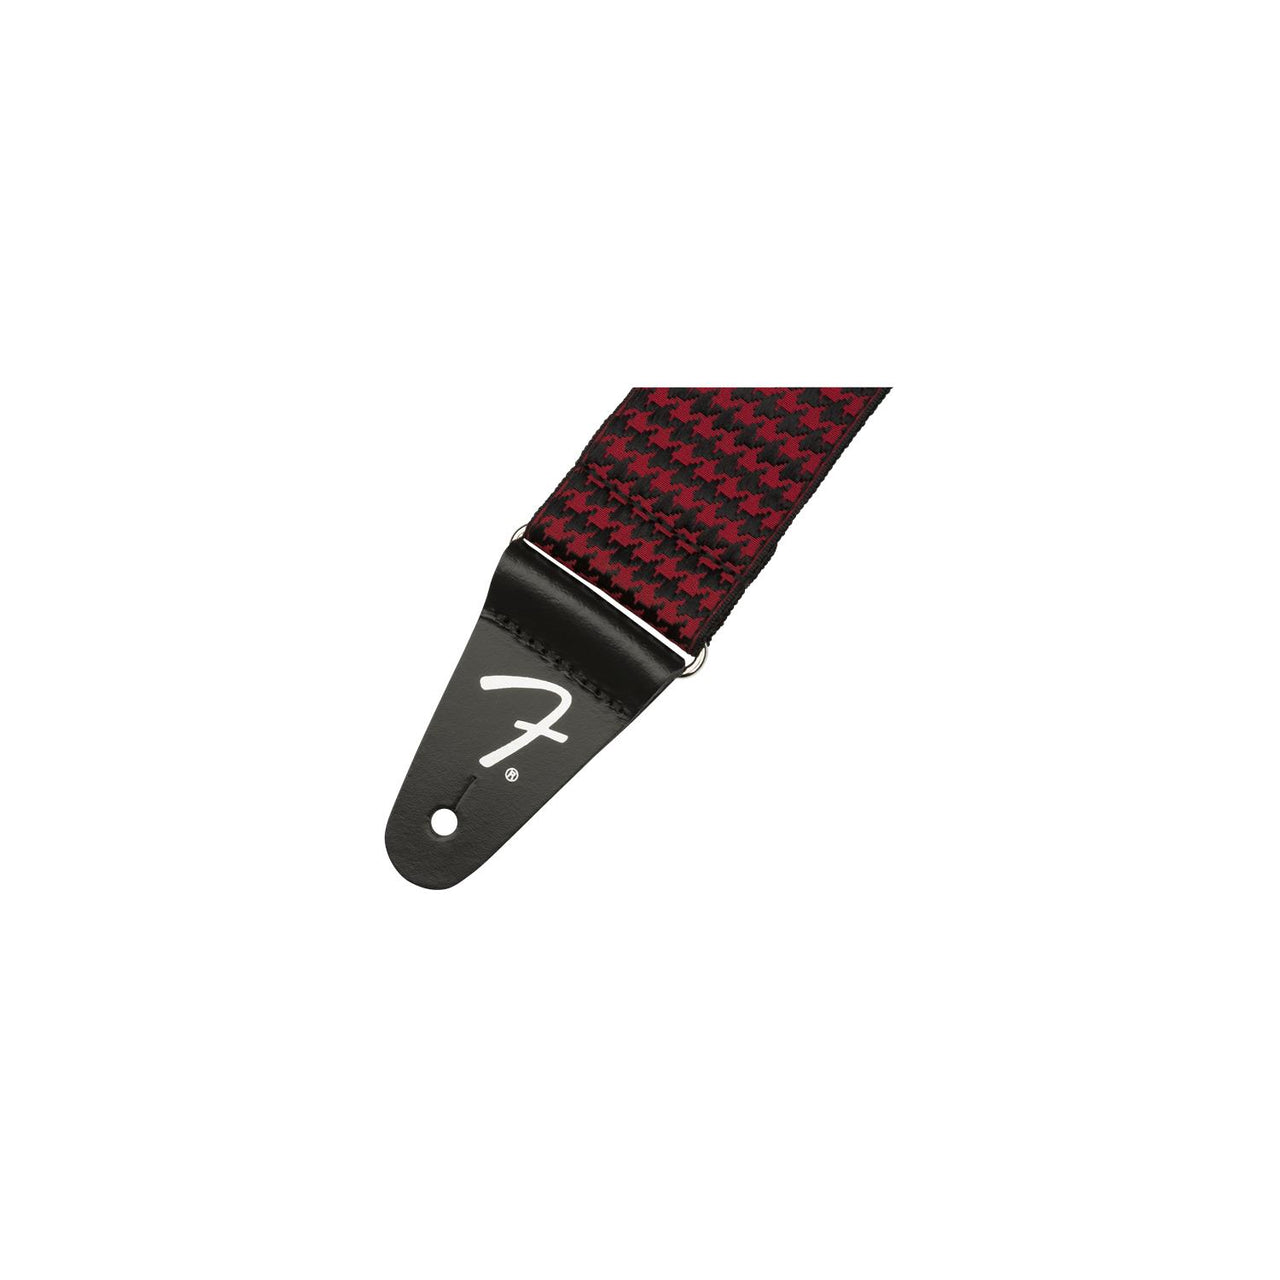 thaly fender p/guitarra houndstooth red, 0990709009